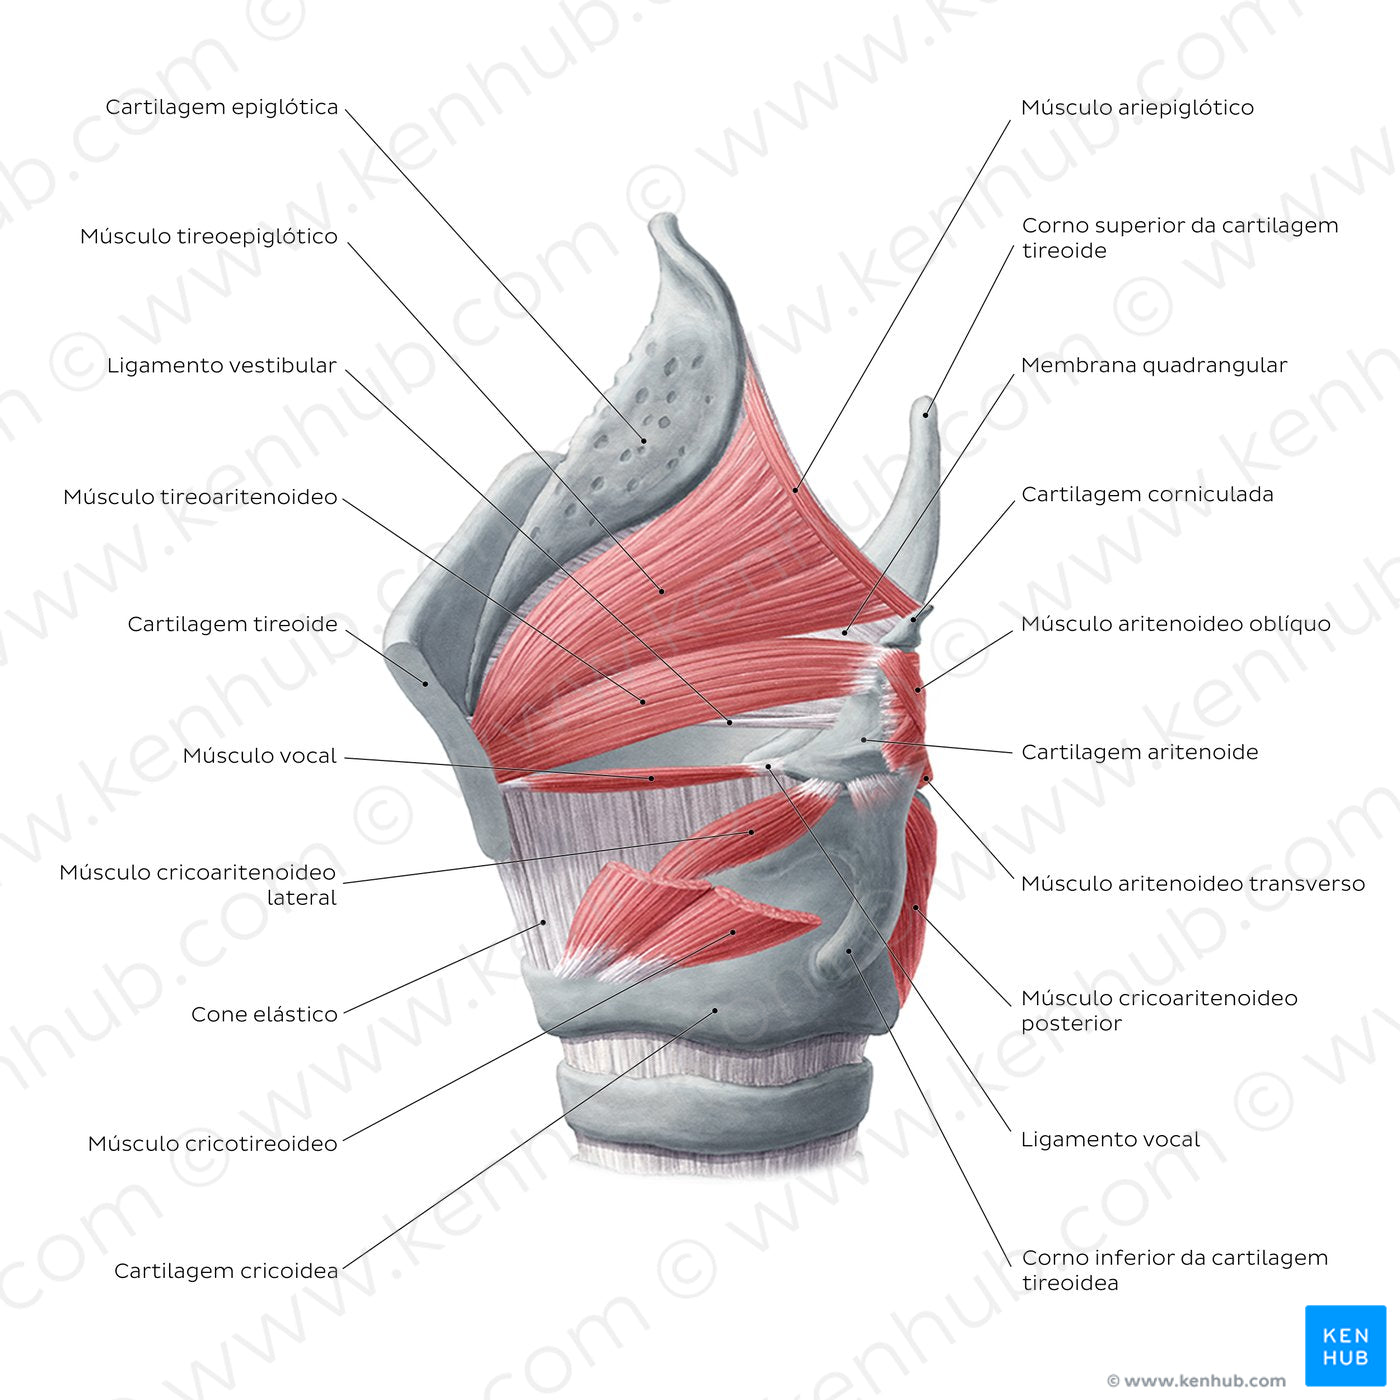 Muscles of the larynx: lateral view (Portuguese)